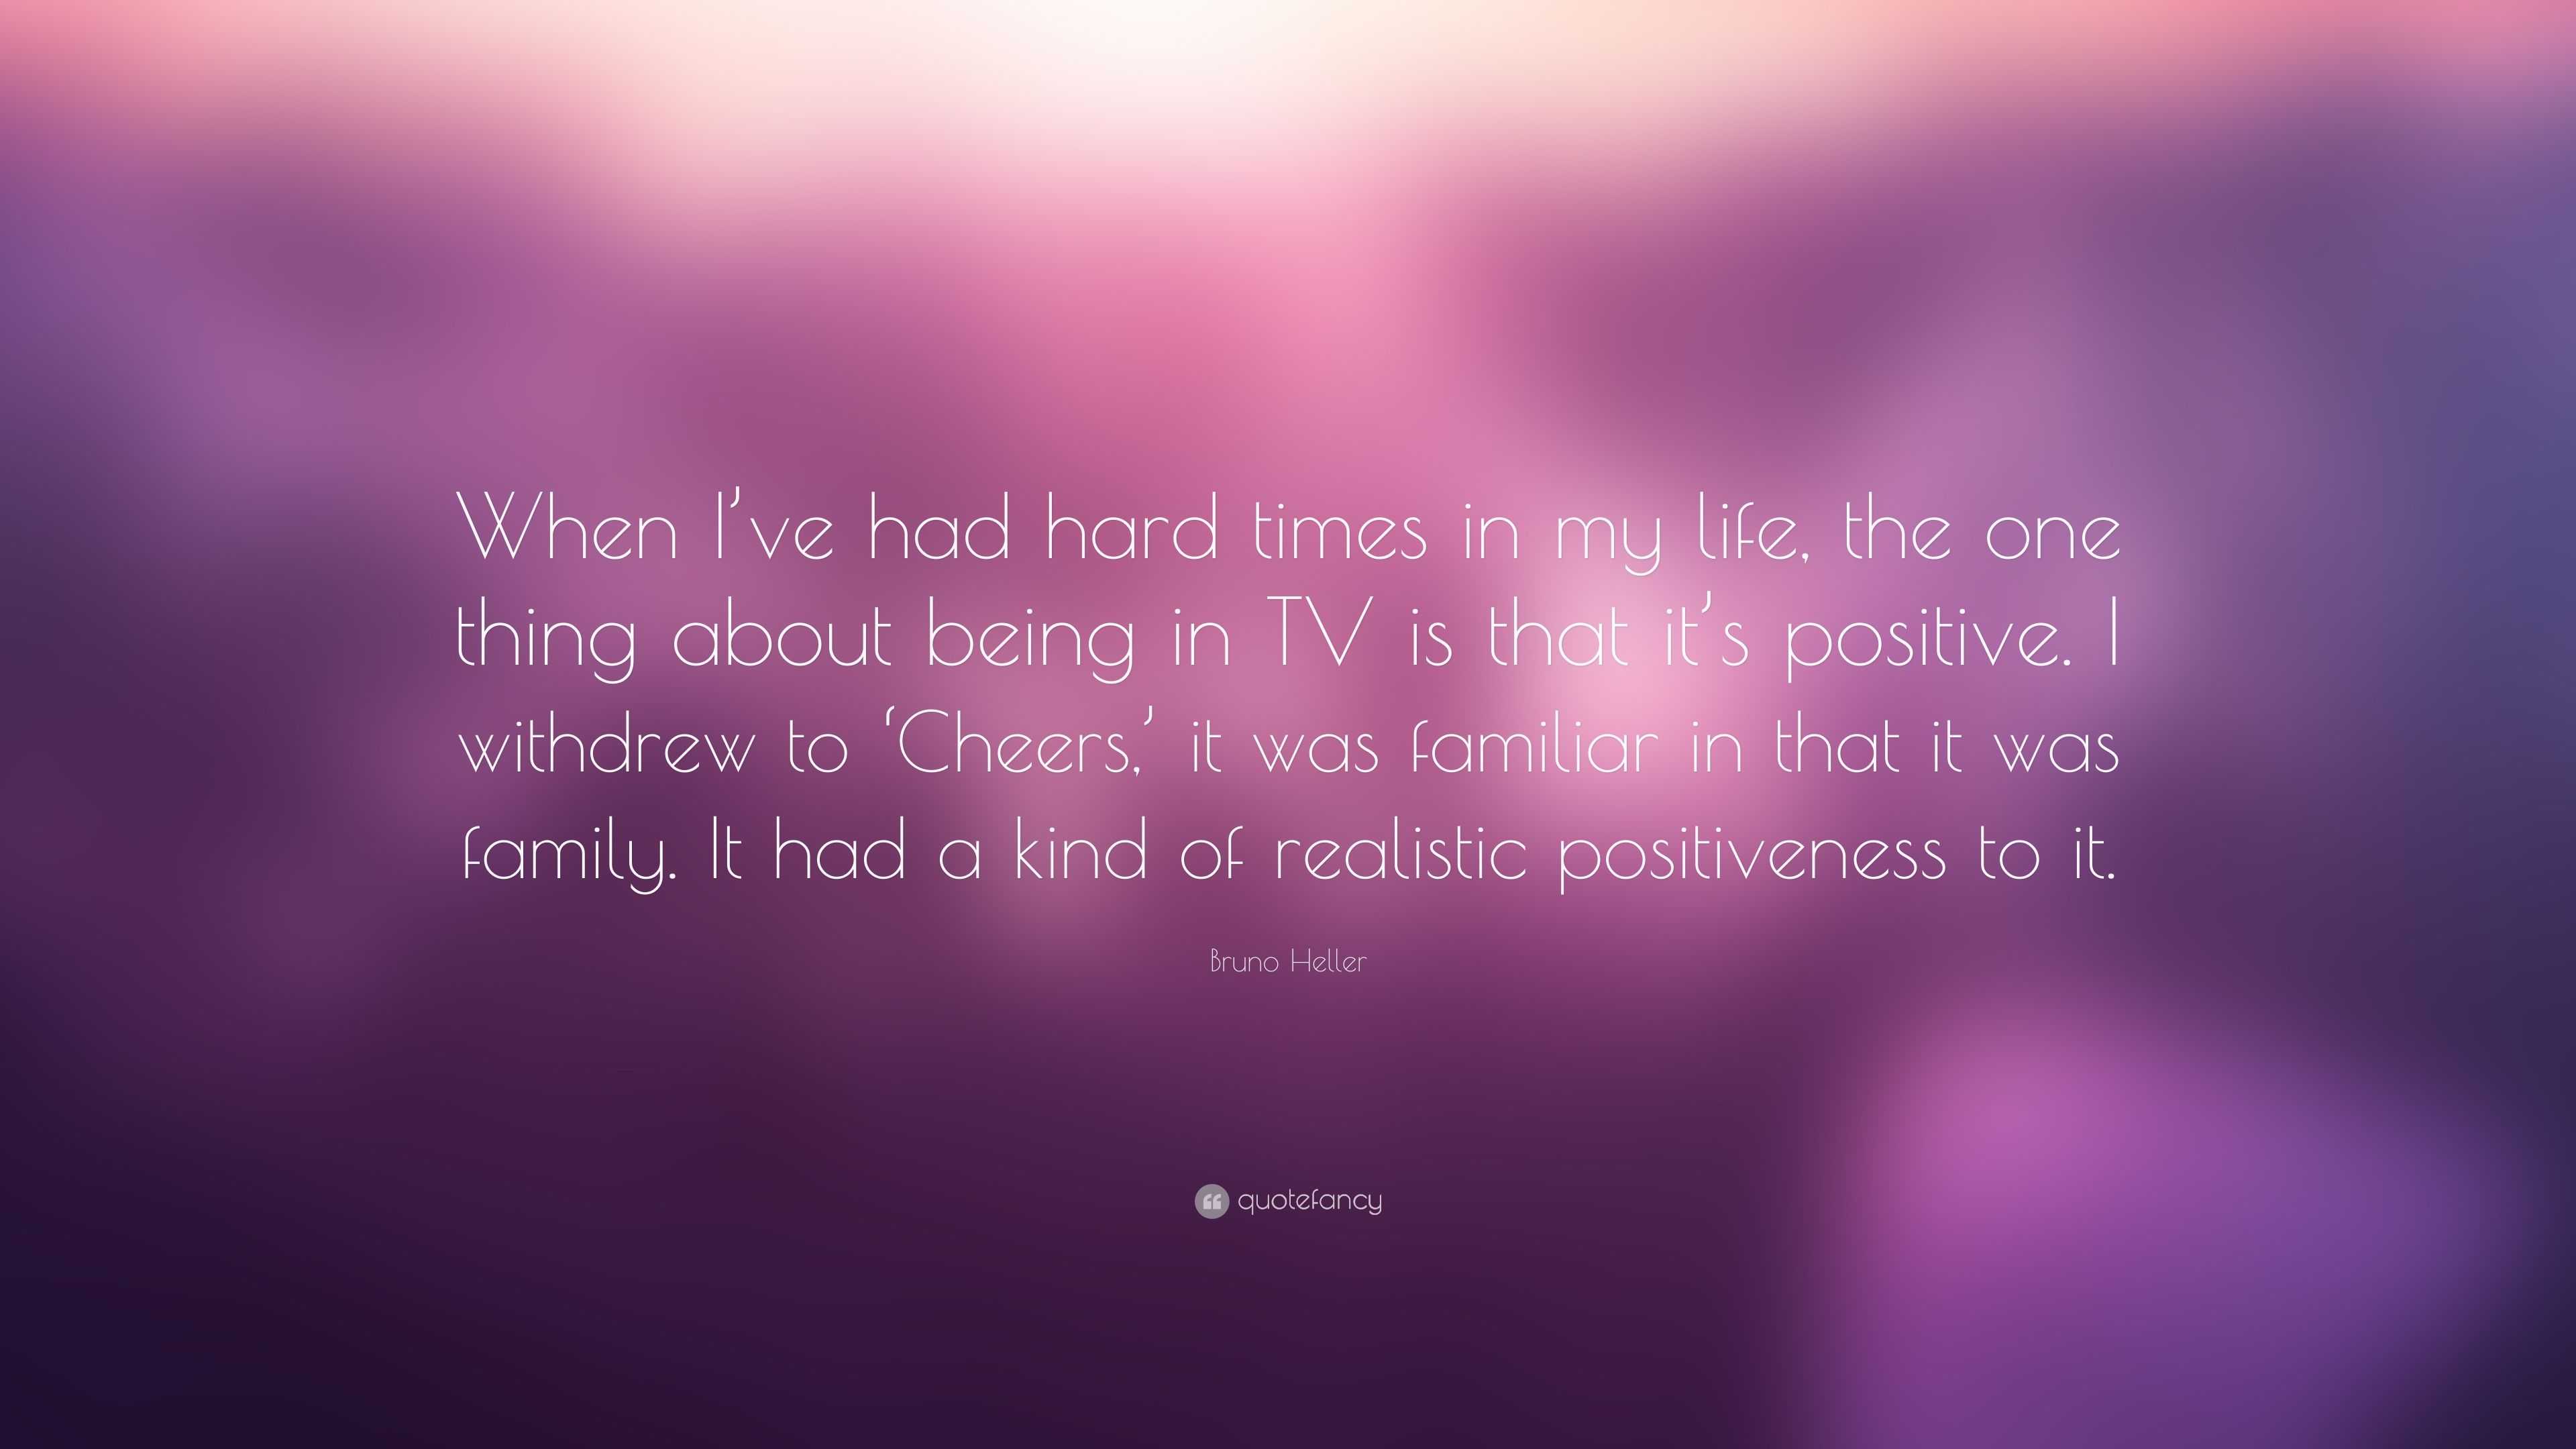 quotes about rough times in life bruno heller quote u201cwhen i u0027ve had hard times in my life the one